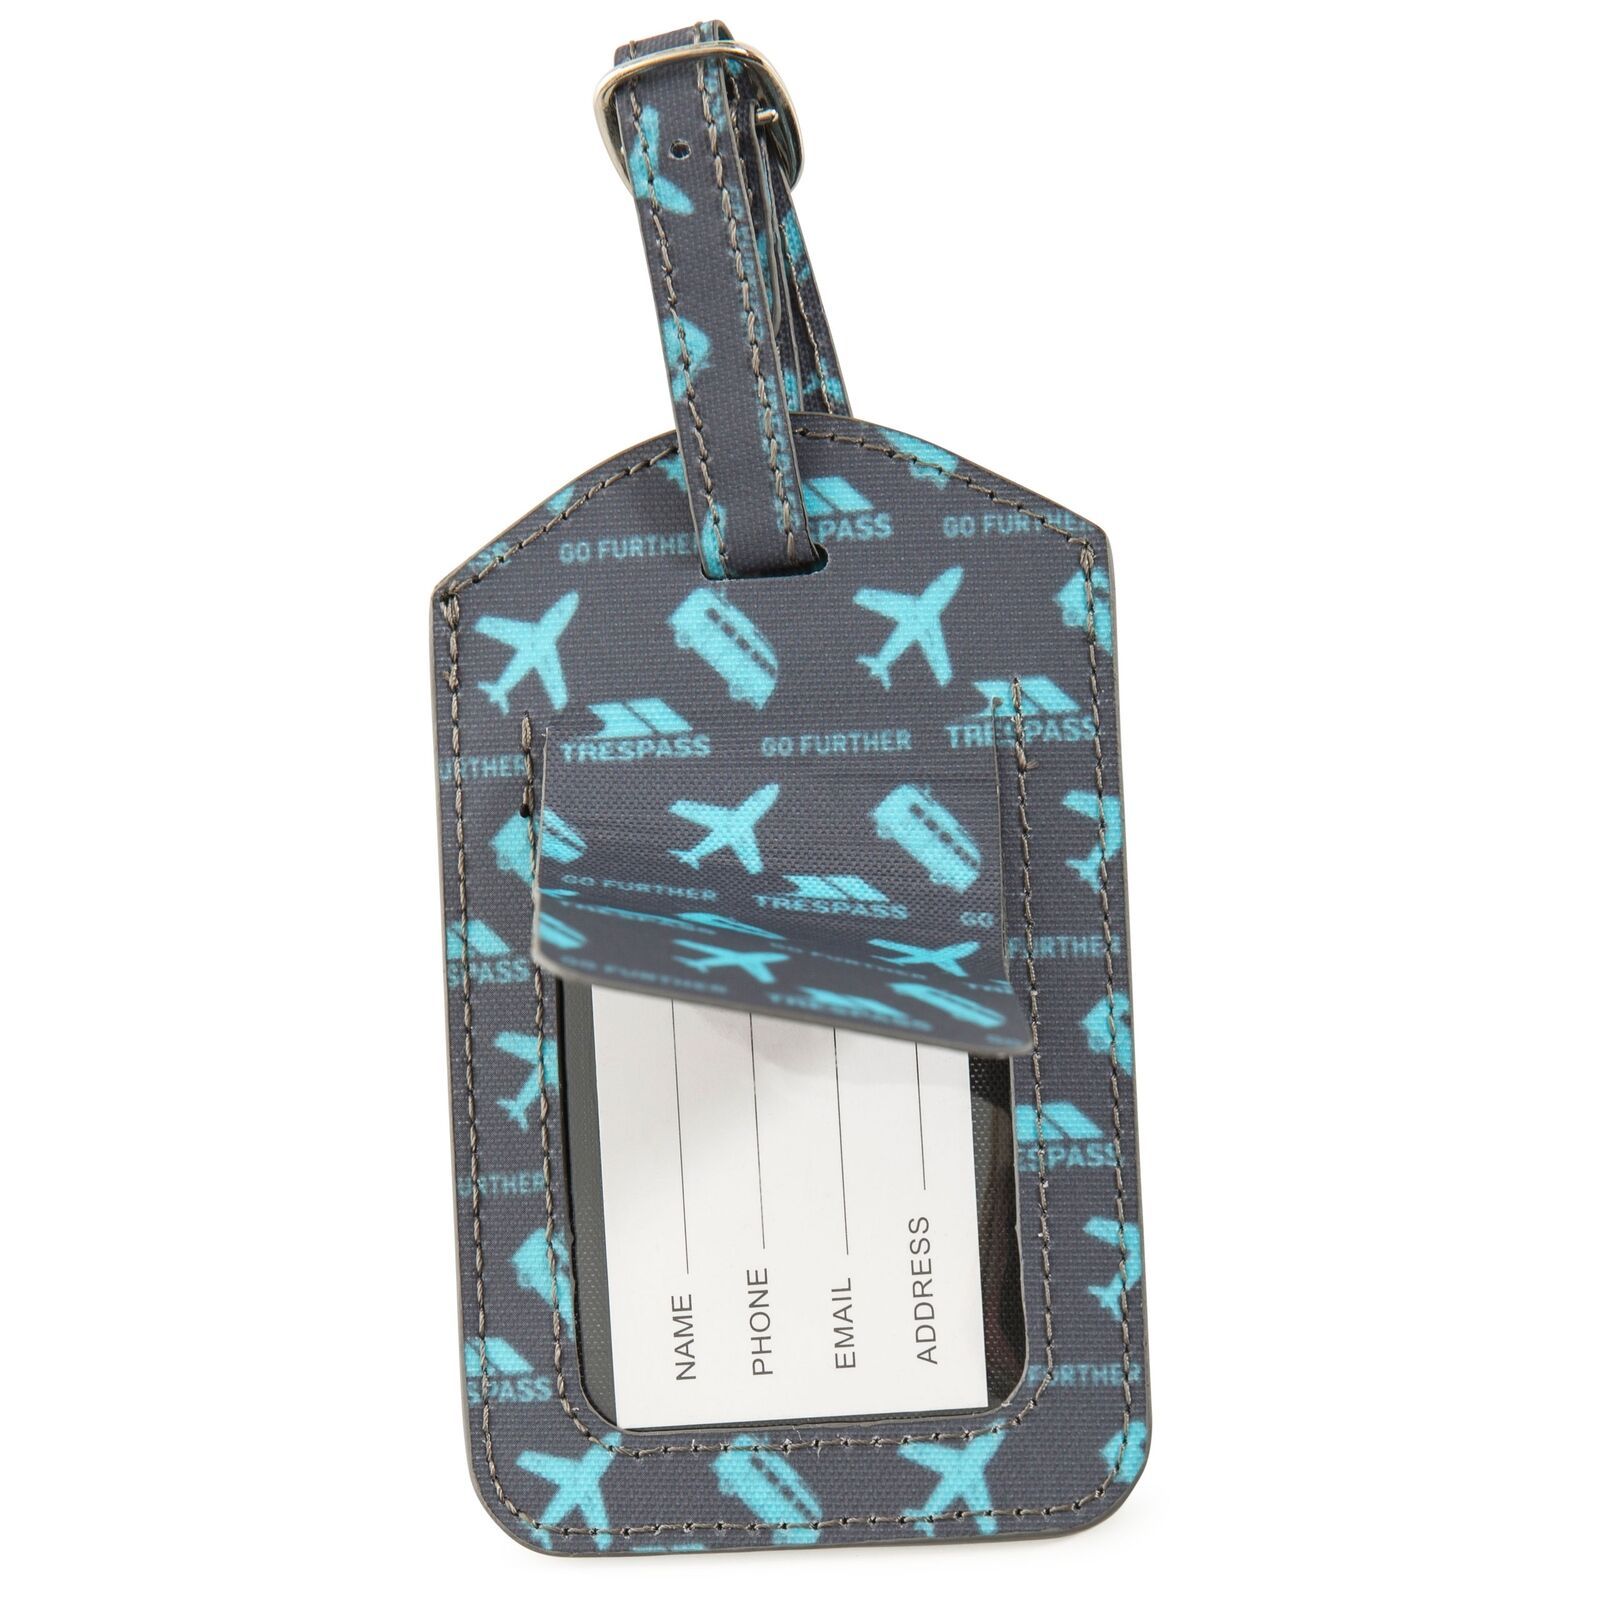 PU with bonded textile print. Name, address and contact panel. Security flap. Buckled strap. Display sleeve.